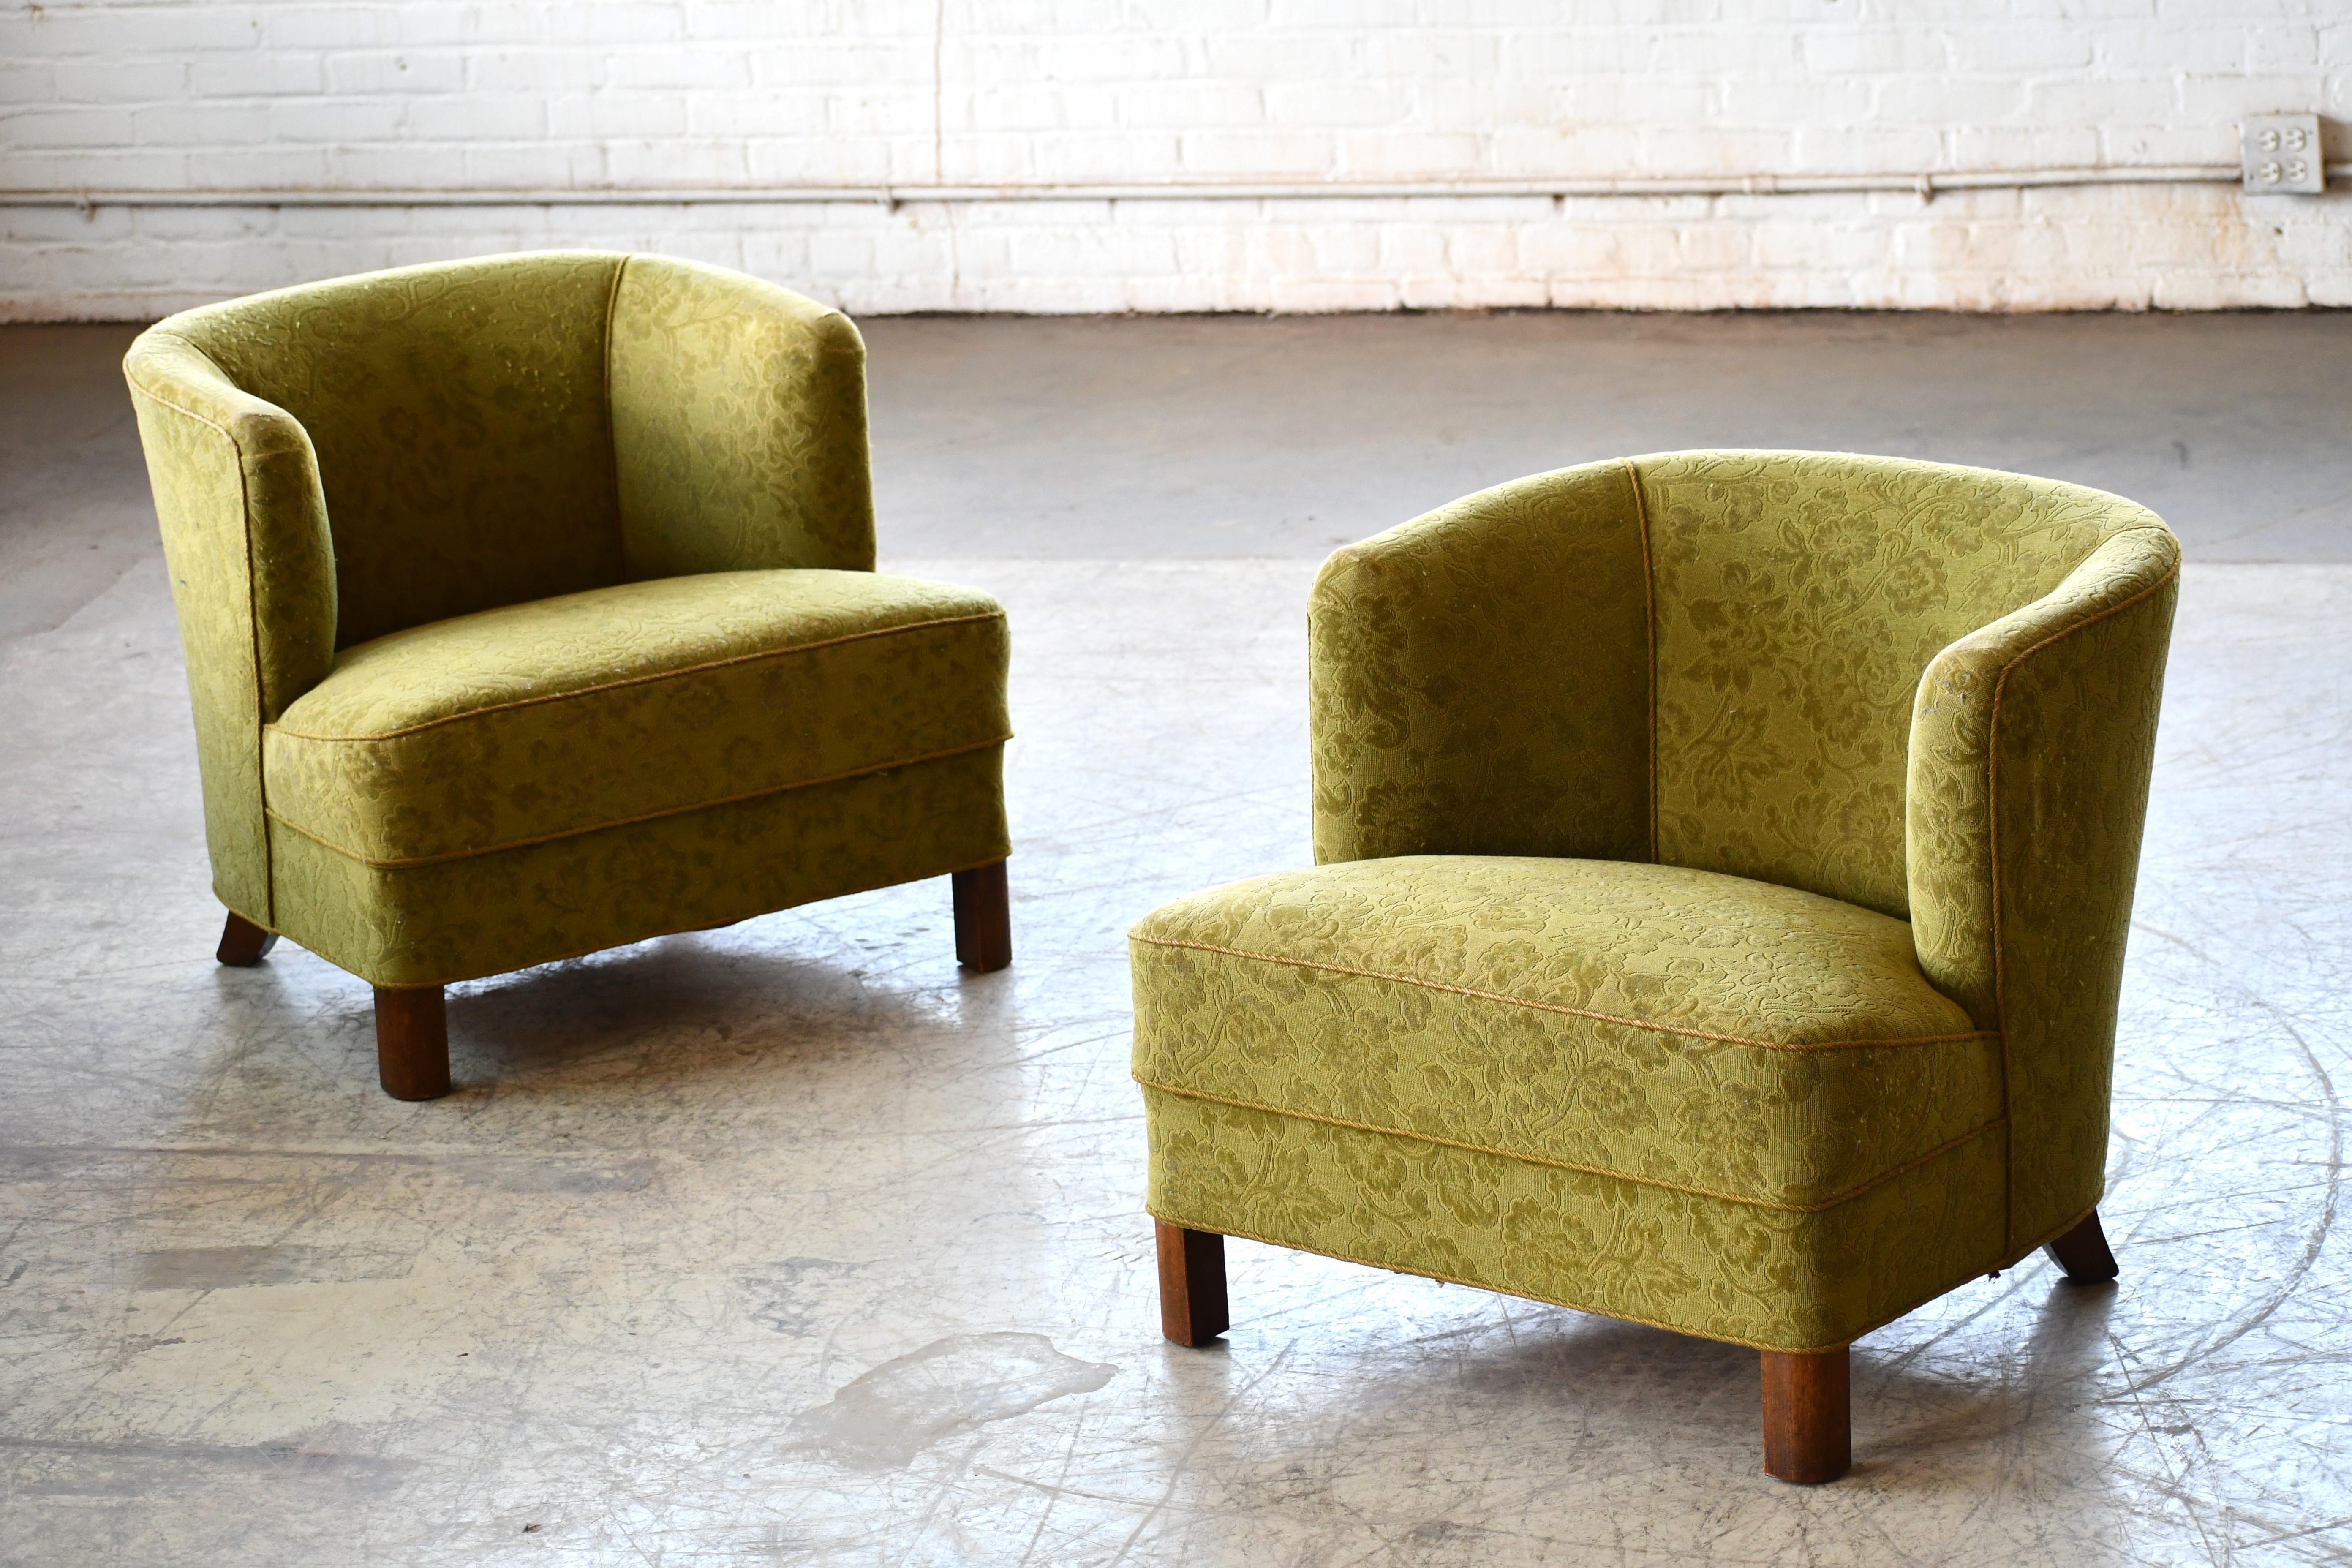 Mid-Century Modern Pair of Ultracool Late Art Deco or Early Midcentury Danish Lounge Chairs 1940's